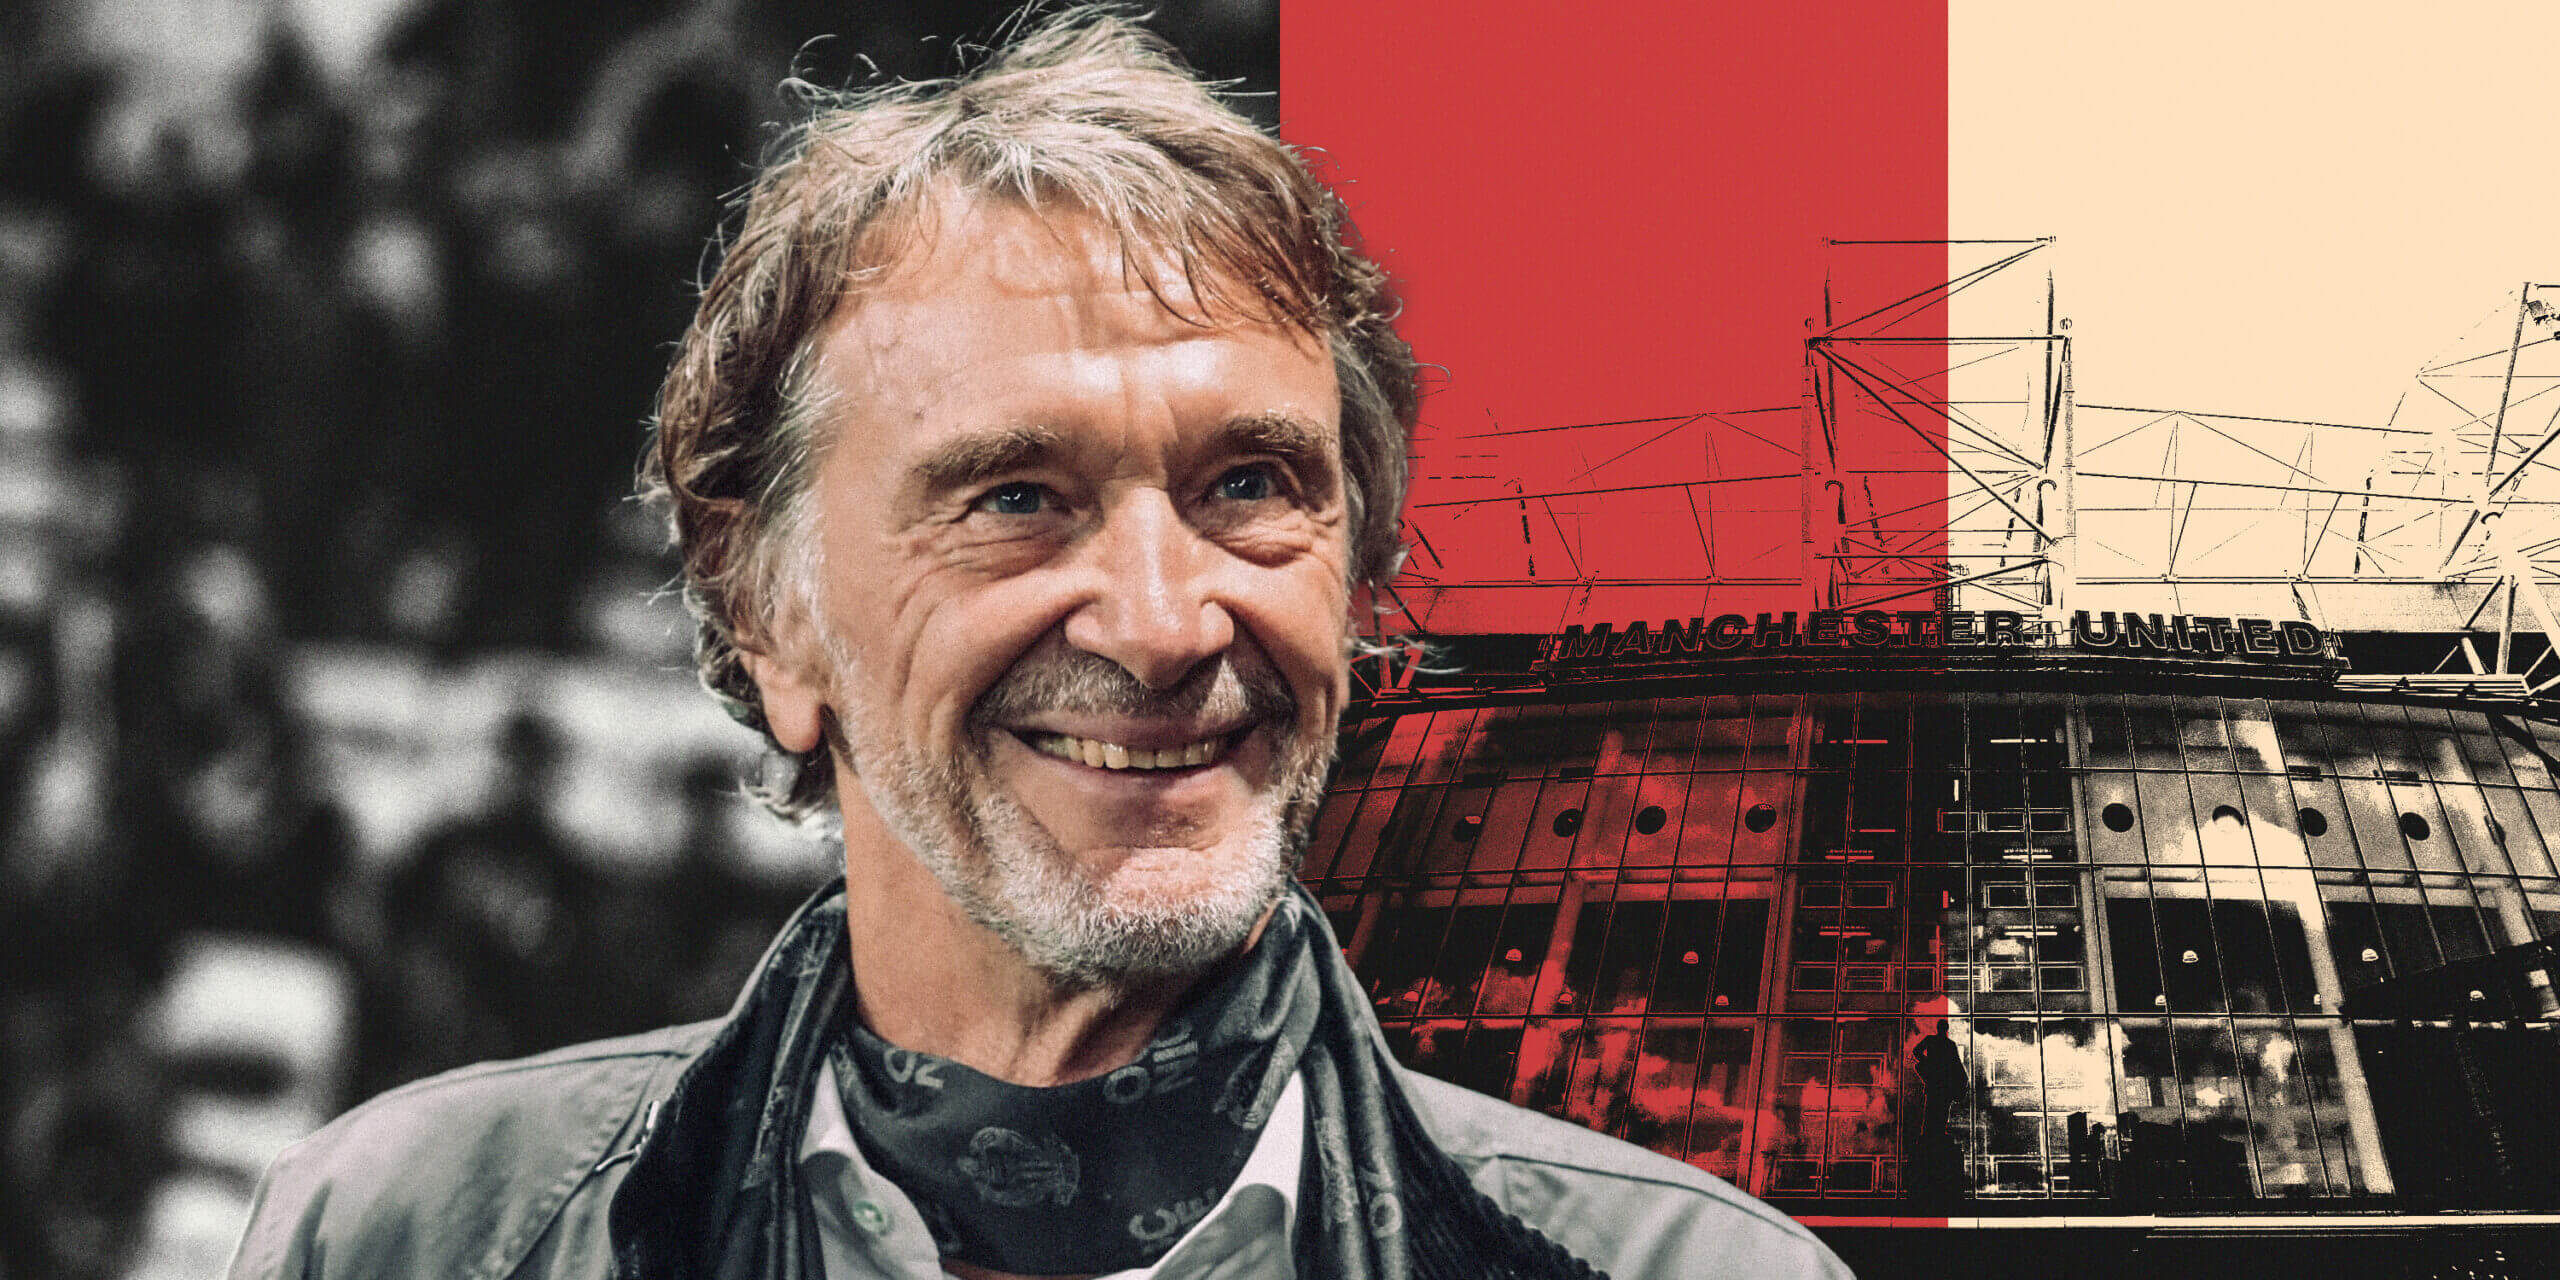 Man Utd to vote on selling minority stake to Sir Jim Ratcliffe as Qataris 'pull out' - The Athletic